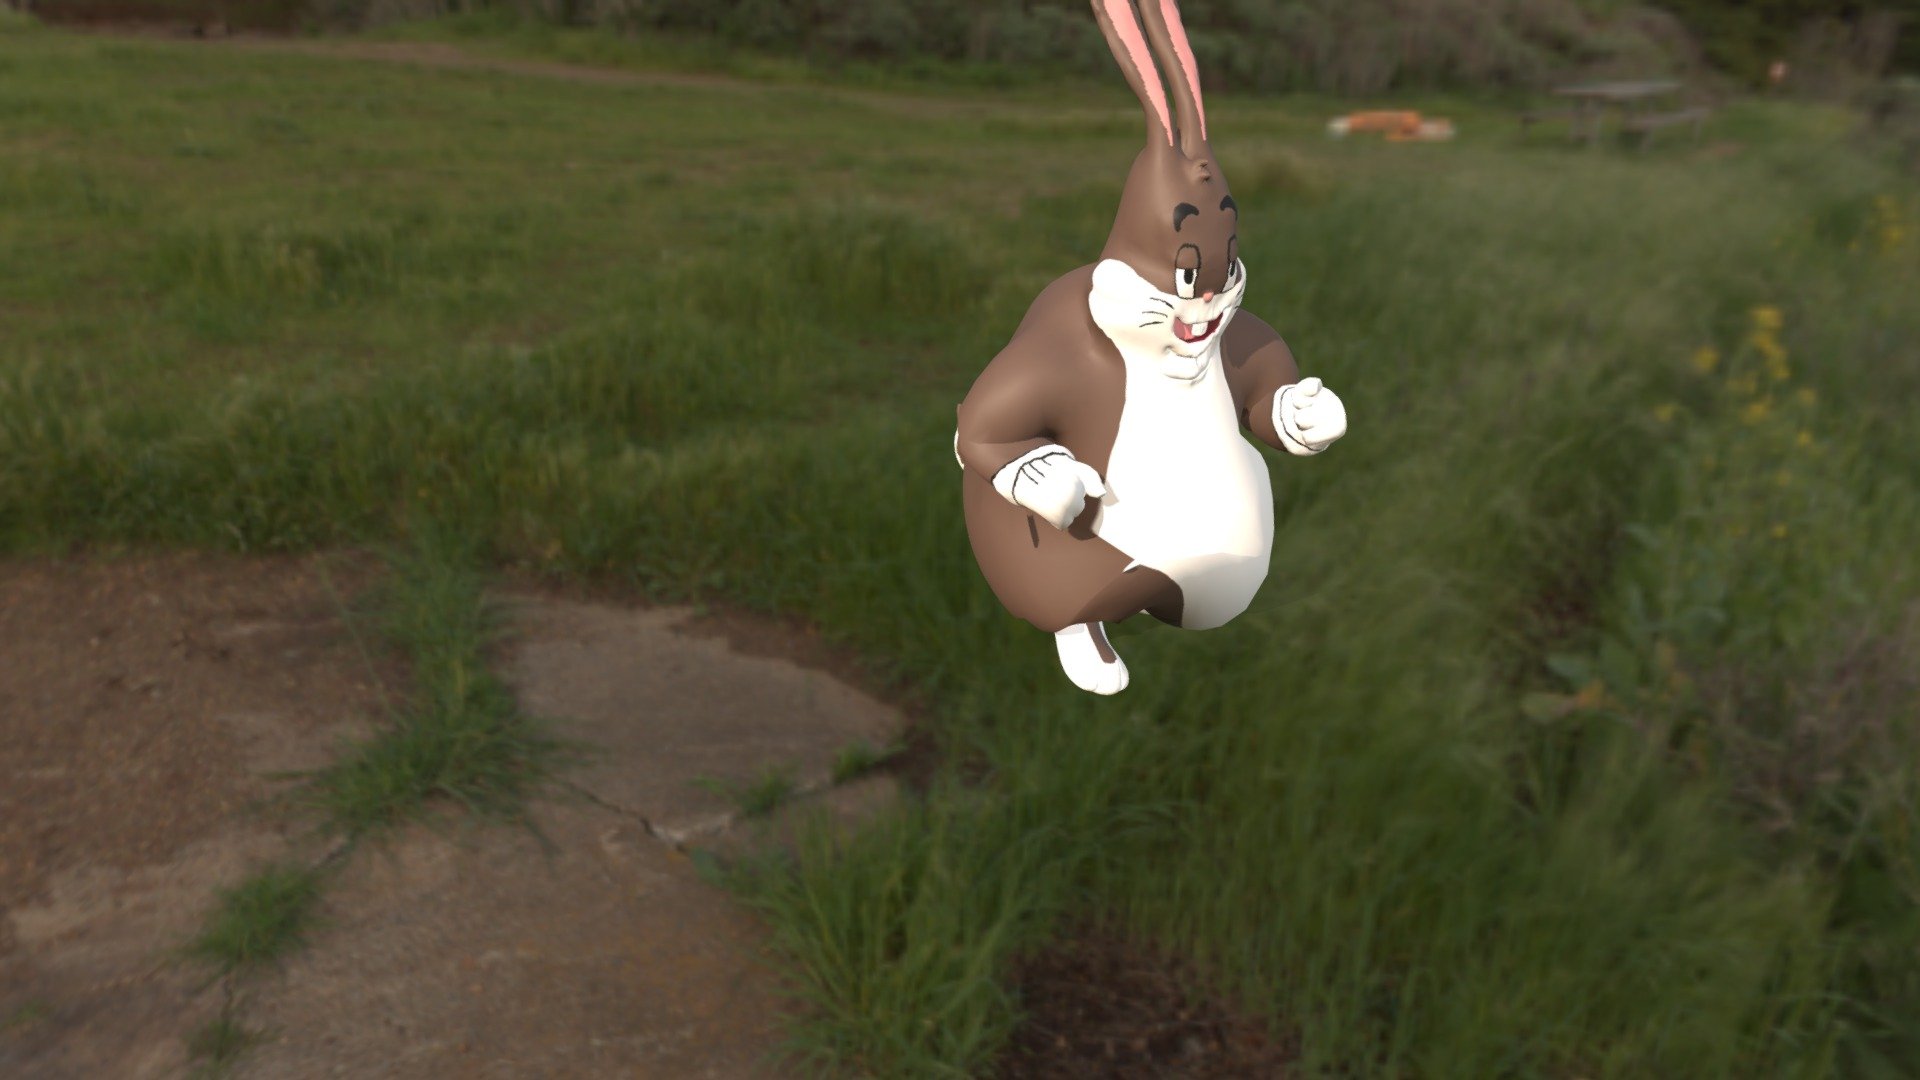 Chungus attempts to lose some weight...